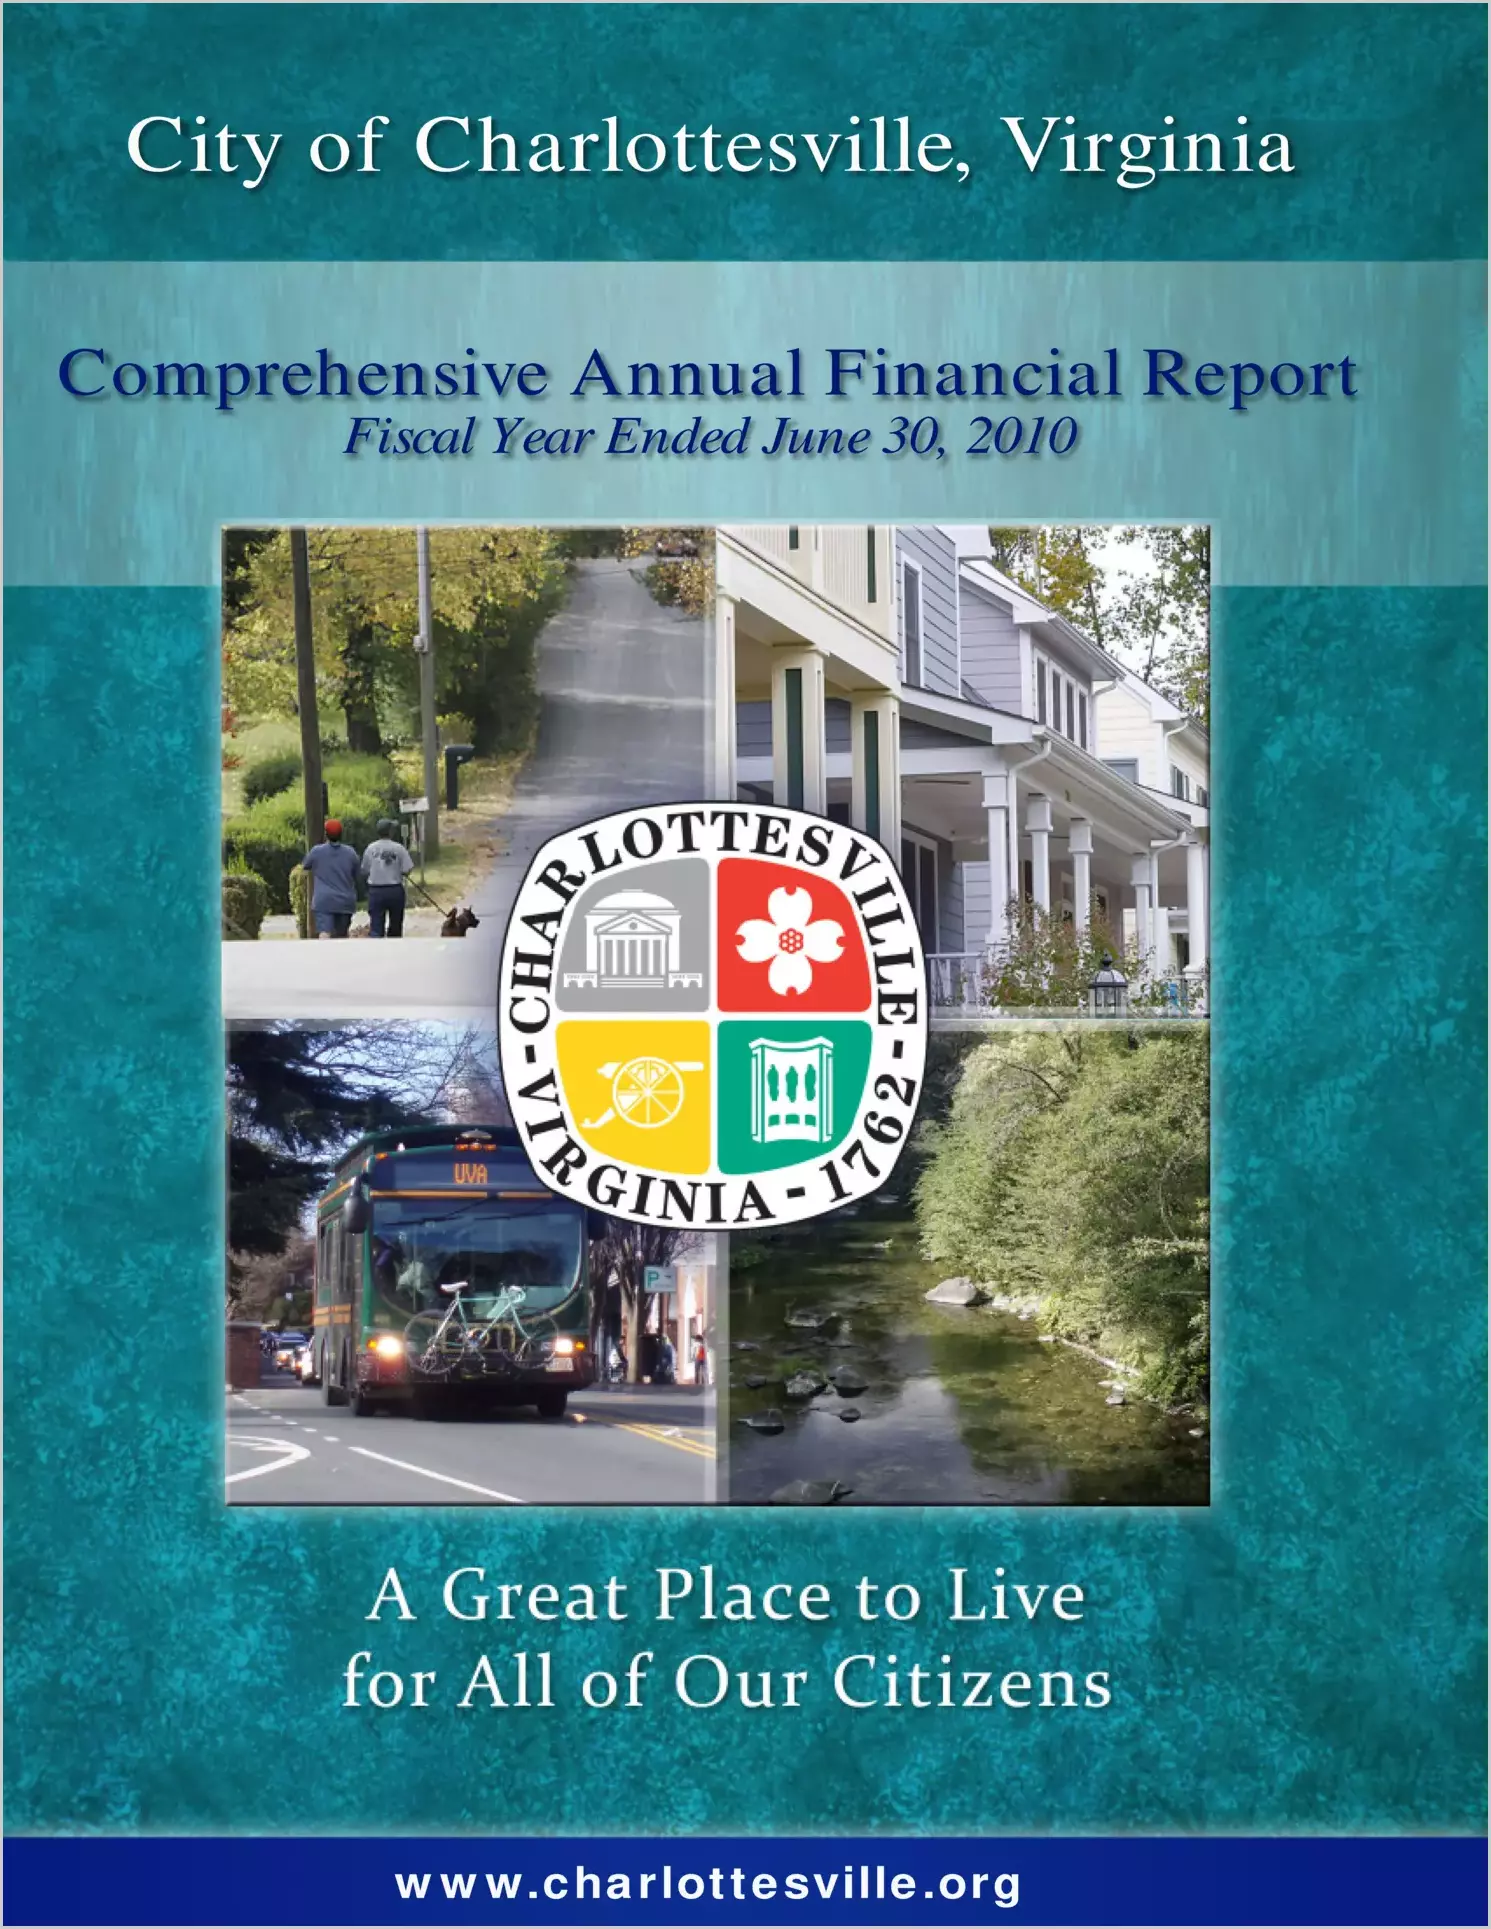 2010 Annual Financial Report for City of Charlottesville